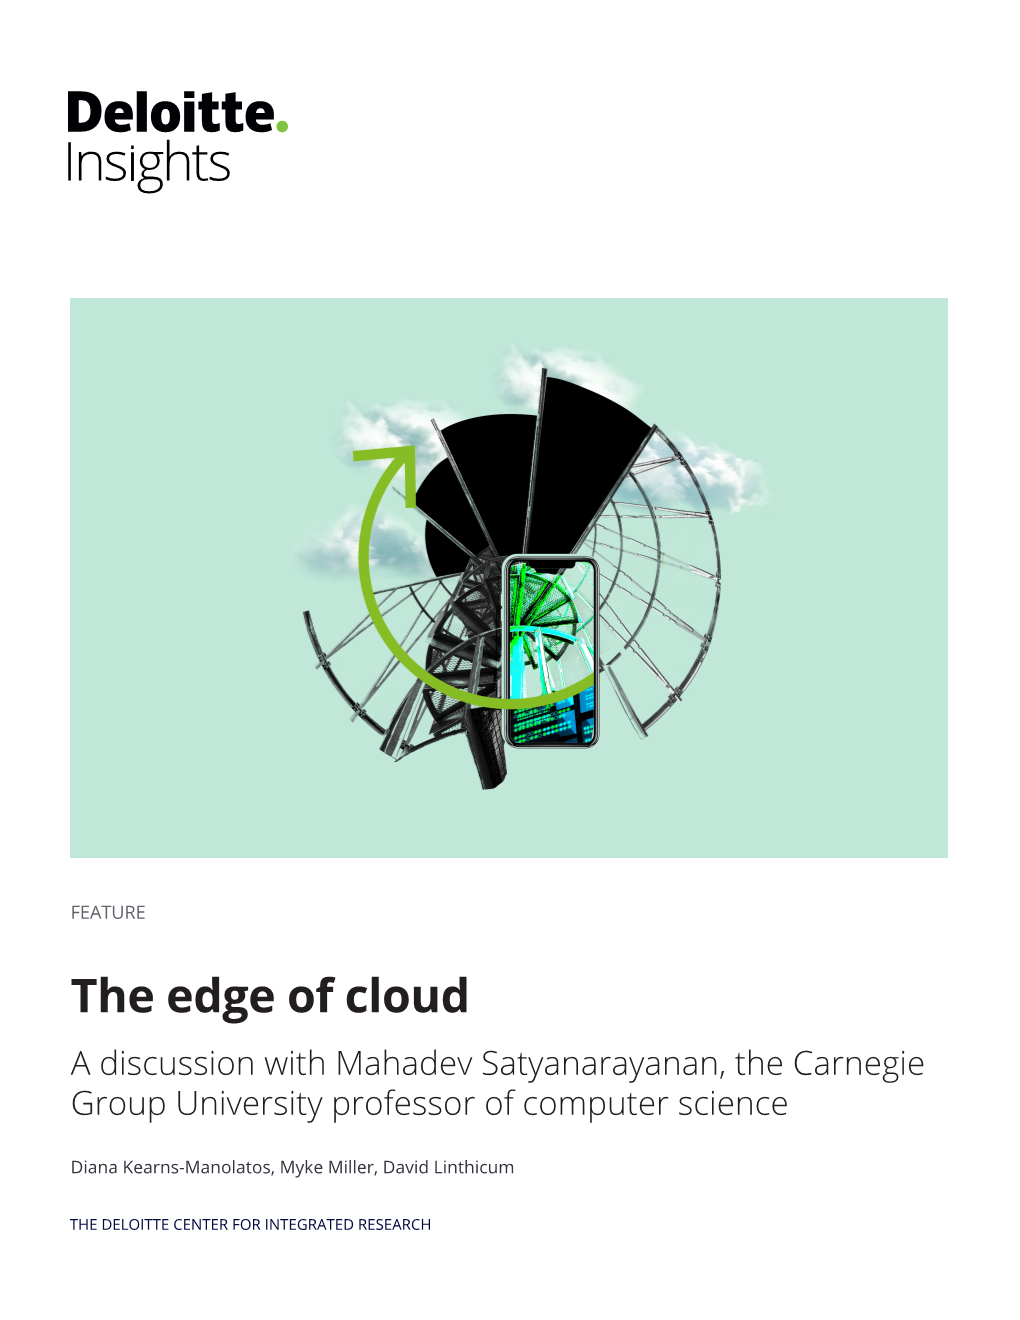 The Edge of Cloud a Discussion with Mahadev Satyanarayanan, the Carnegie Group University Professor of Computer Science